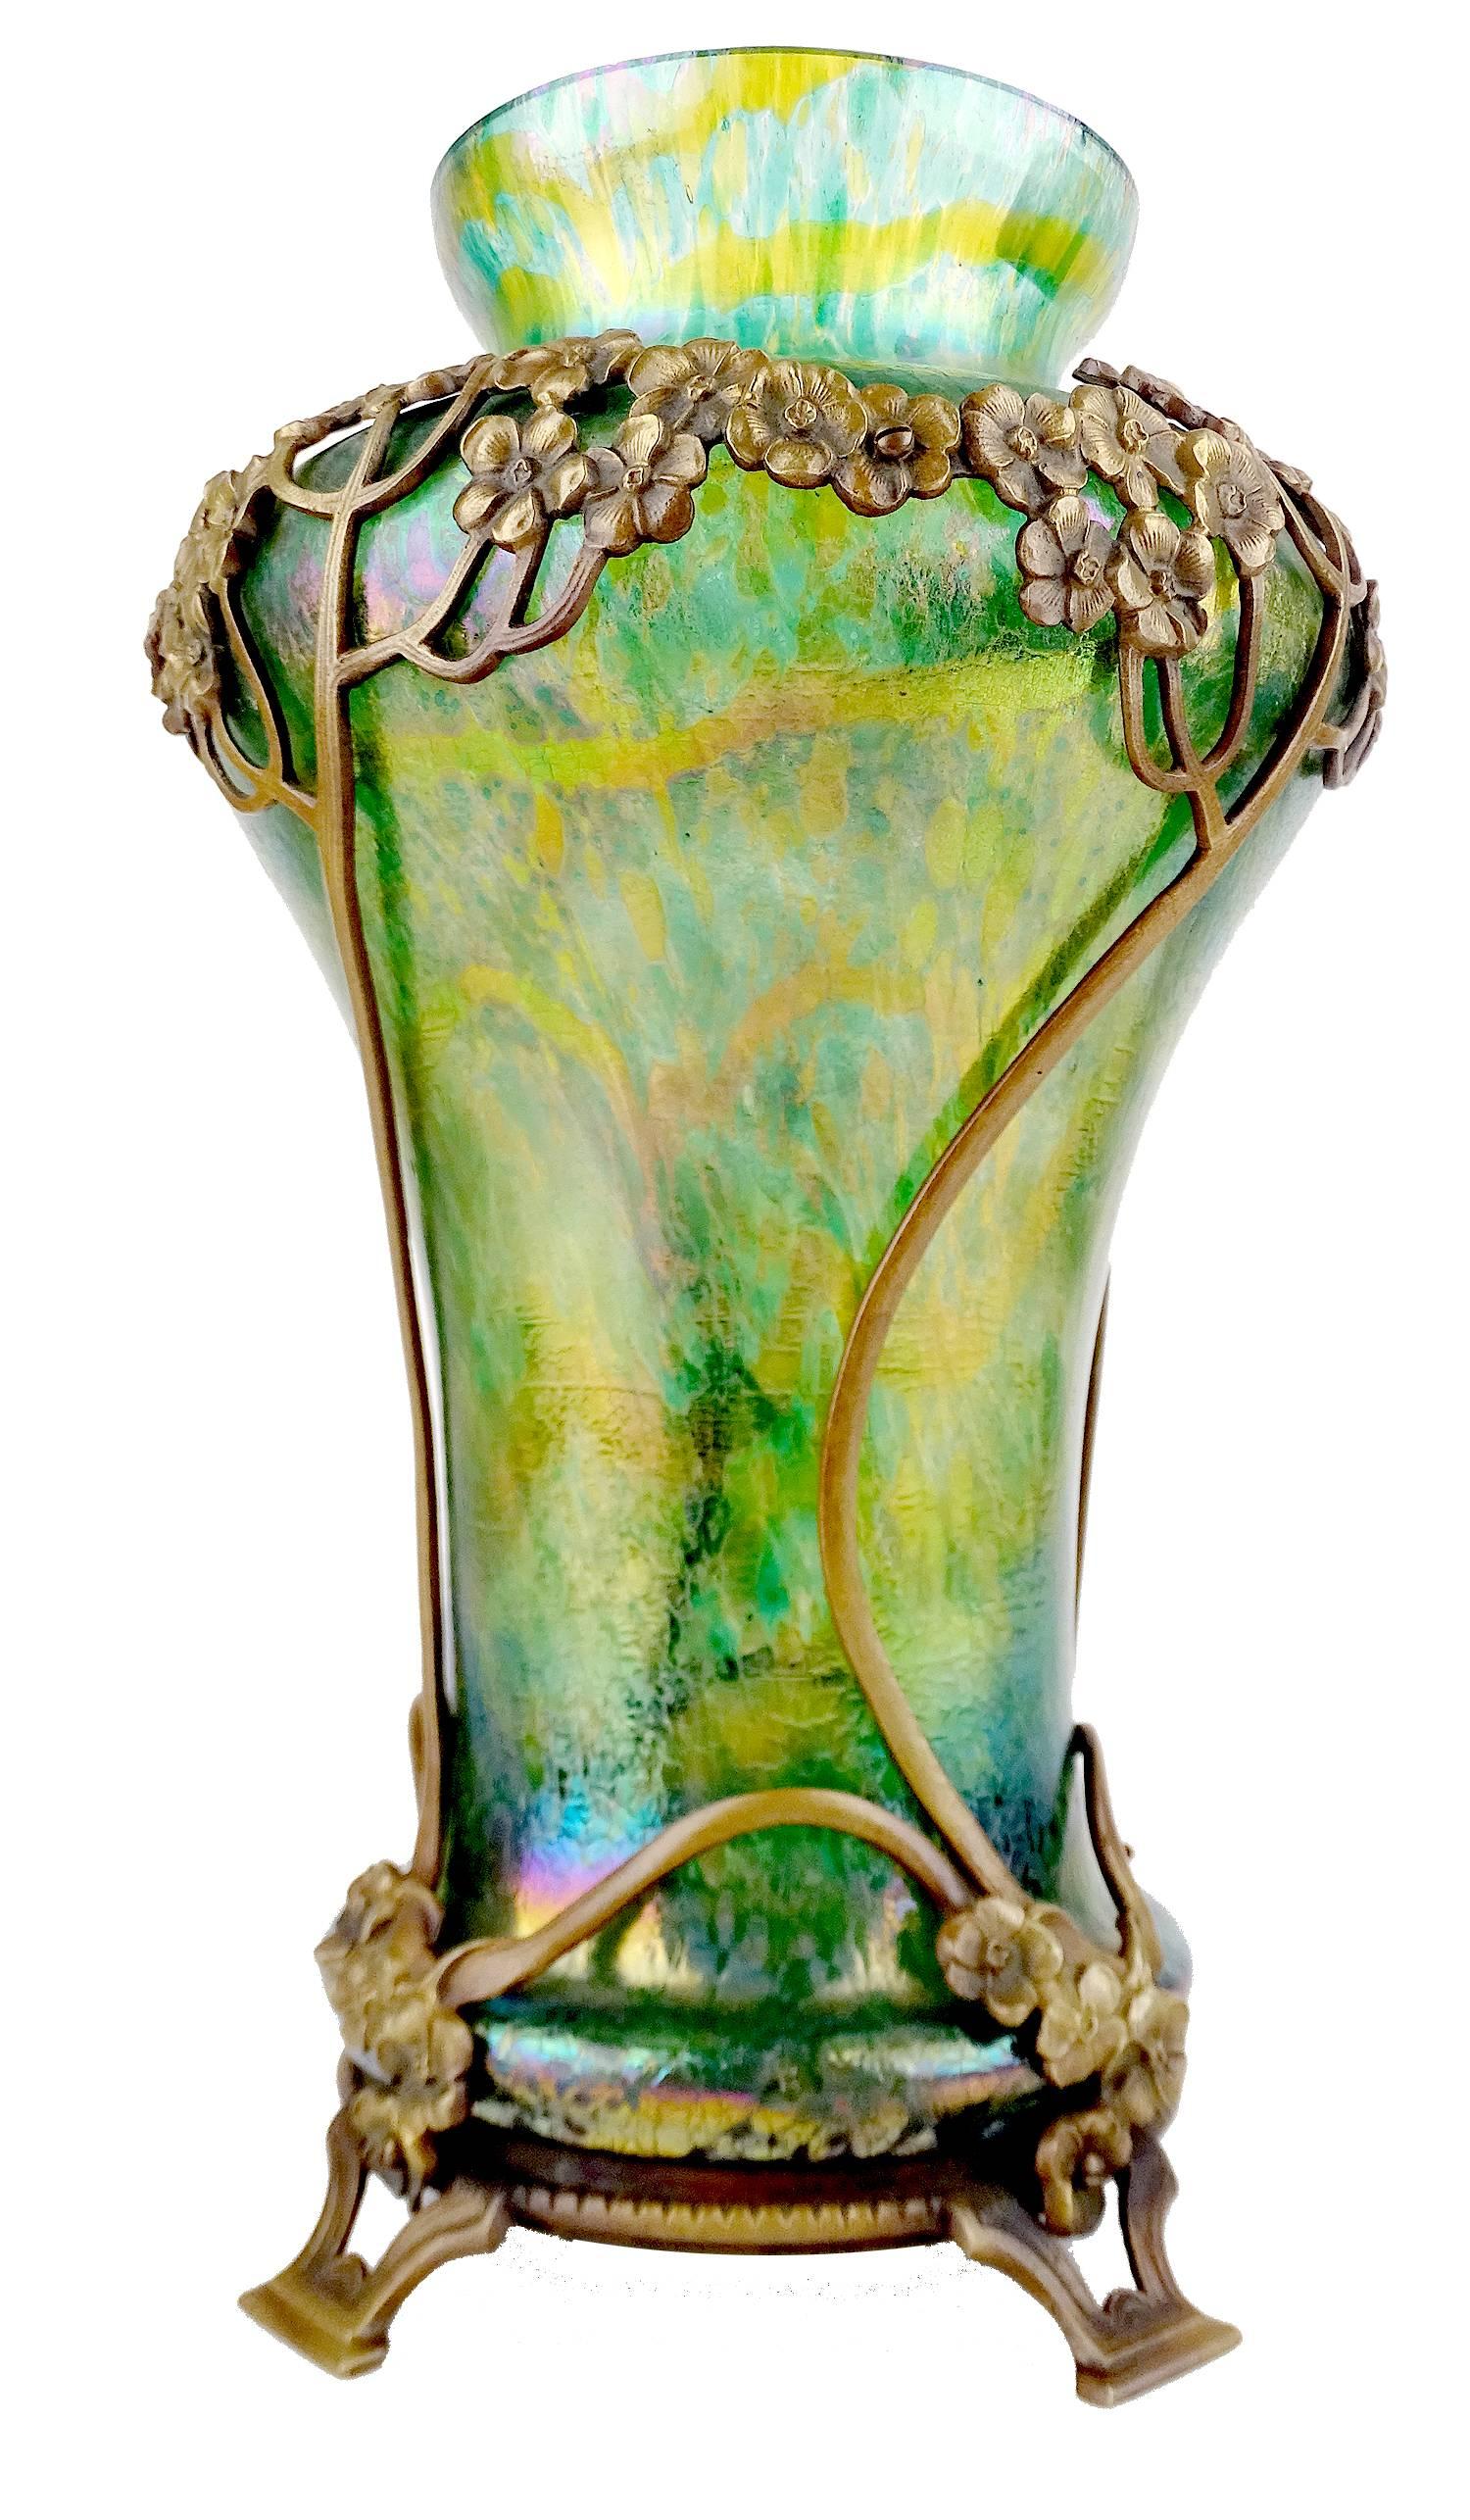 Exceptionnal Art Nouveau glass vase with bronze overlay, most probably by Loetz or Kralik, circa 1900. Yellow and turquoise-green iridescent glass, with purple reflects. Embedded into a bronze frame decorated with ranking hydrangea